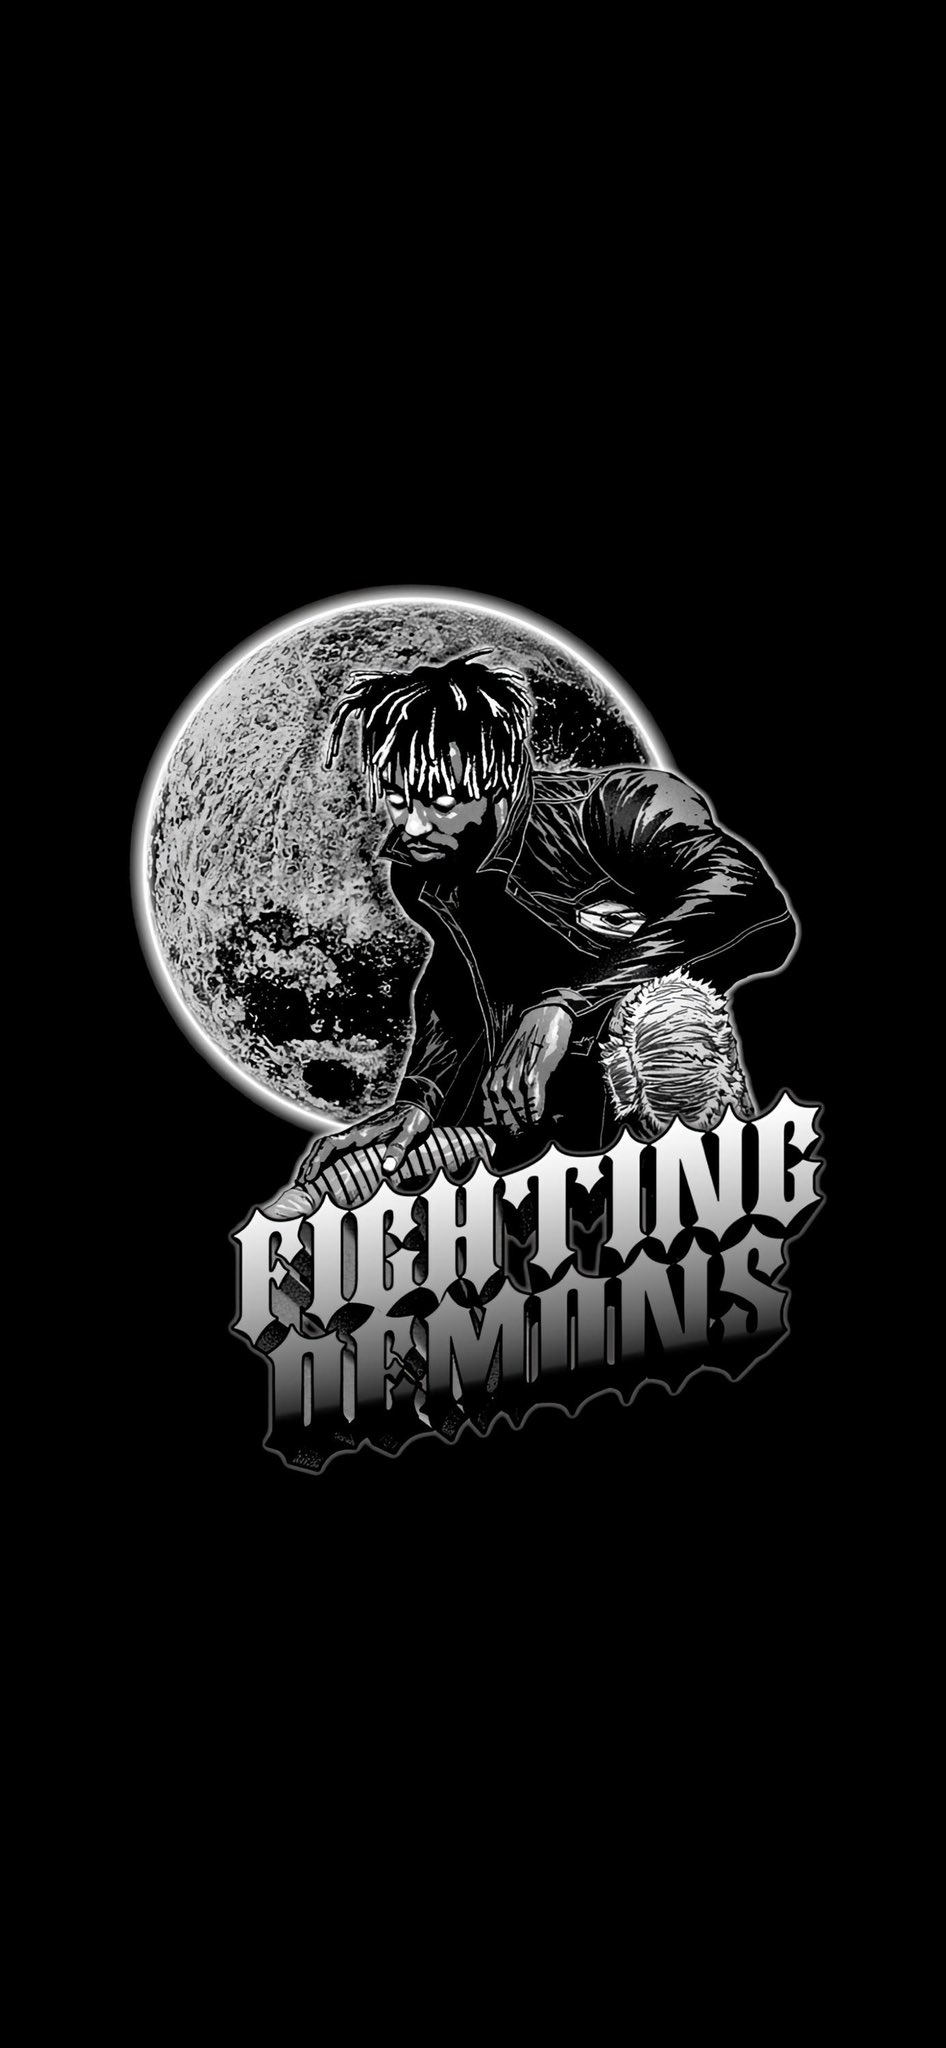 Nathan WRLD Fighting Demons Wallpaper I Made Based Off Of The New Merch Drop! 1 2 If You Like These Edits Please Consider Leaving A Like And Following! #juicewrld #fightingdemons #